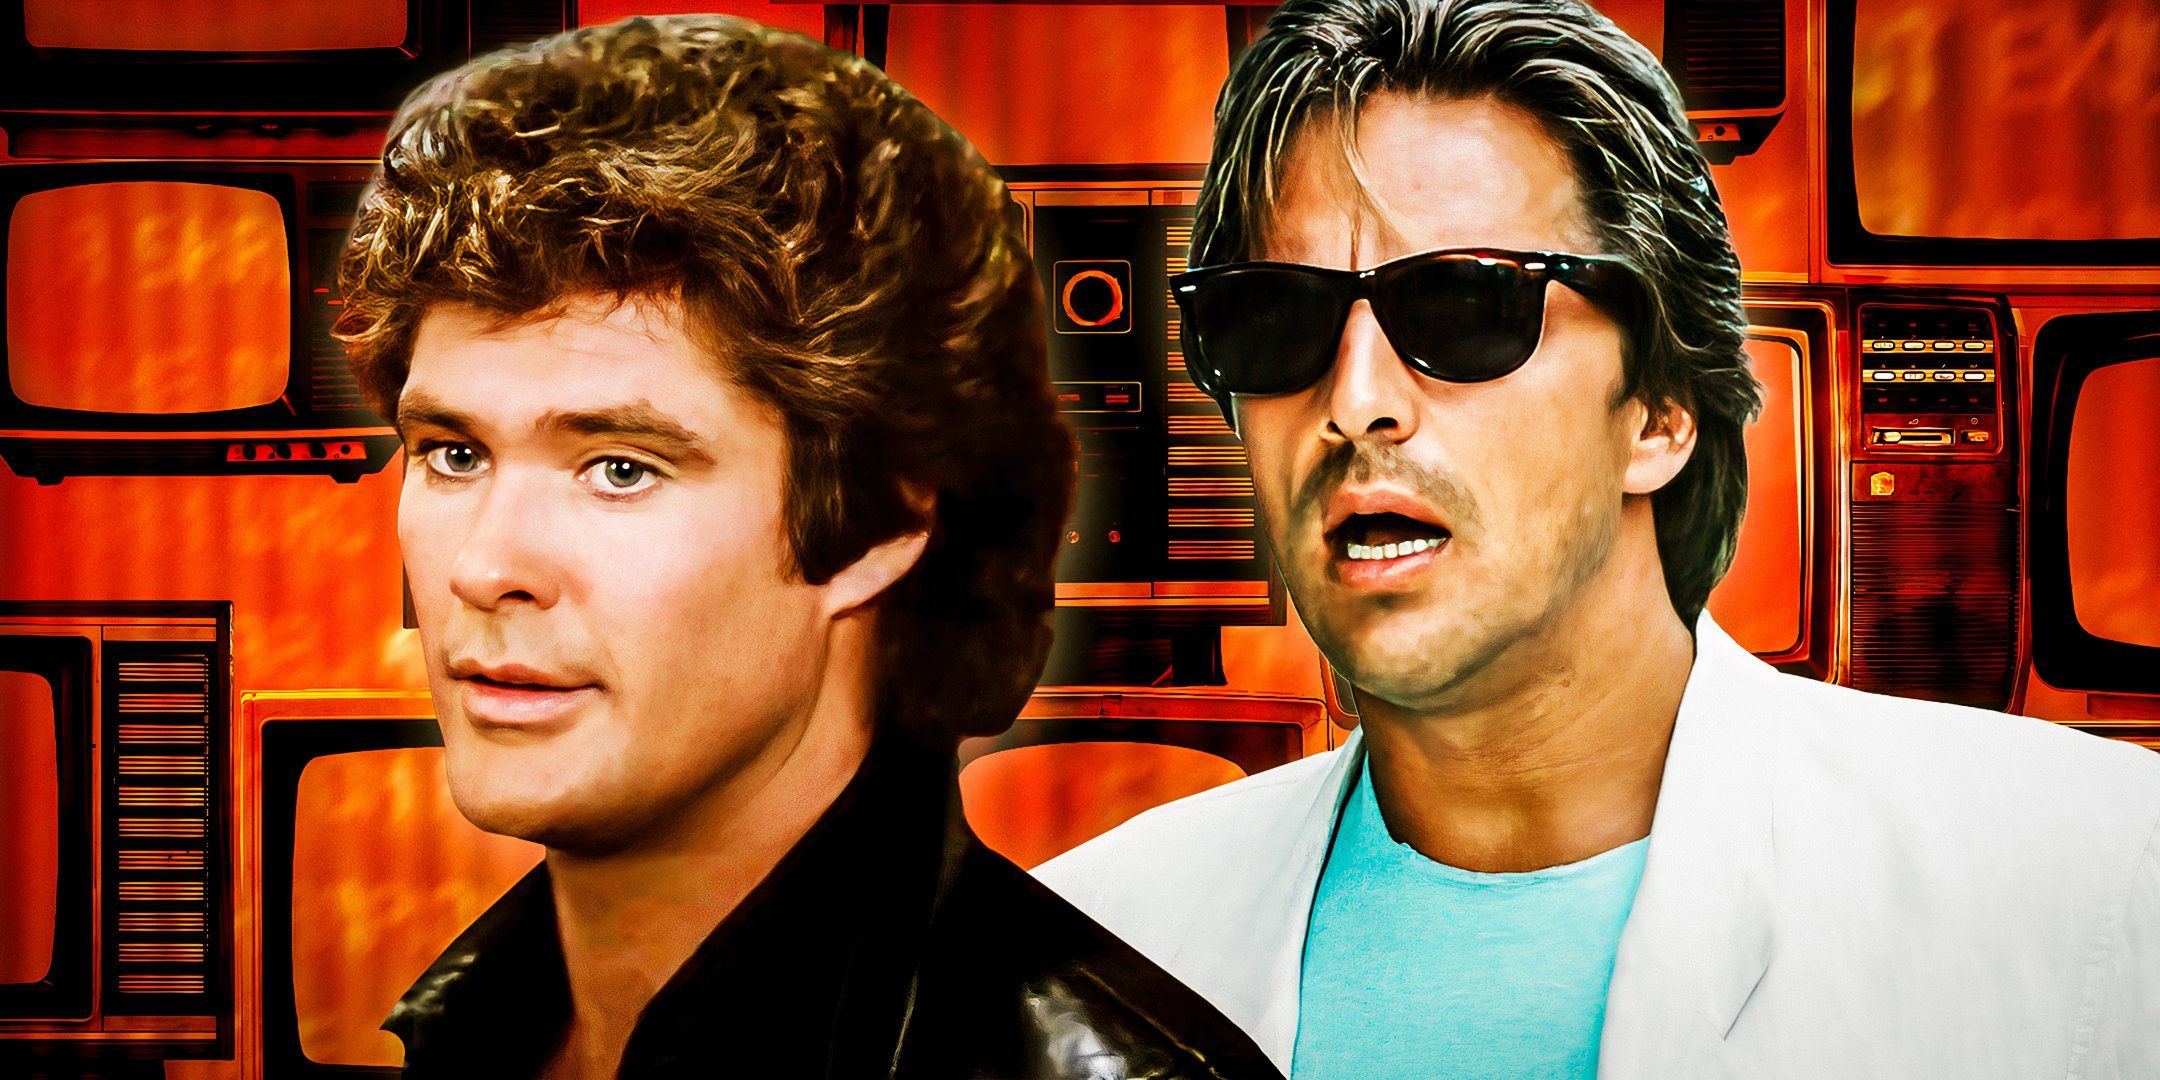 David Hasselhoff as Michael Knight from Knight Rider and Don Johnson as Detective James Crockett from Miami Vice